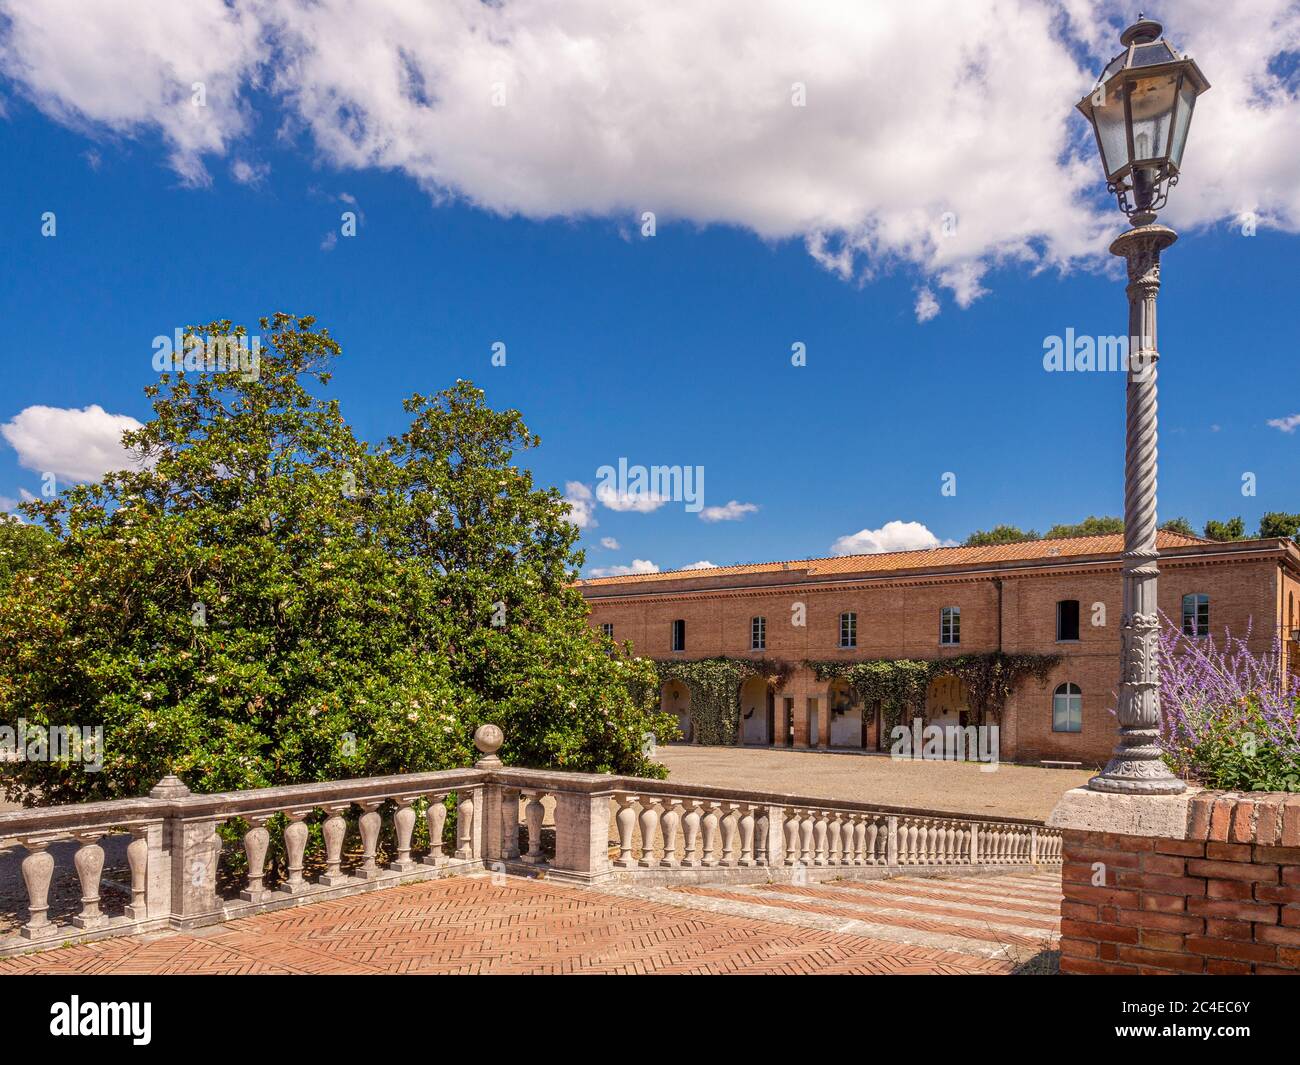 The Medici Fortress, now home to National Academy of Jazz, Siena. Tuscany, Italy. Stock Photo